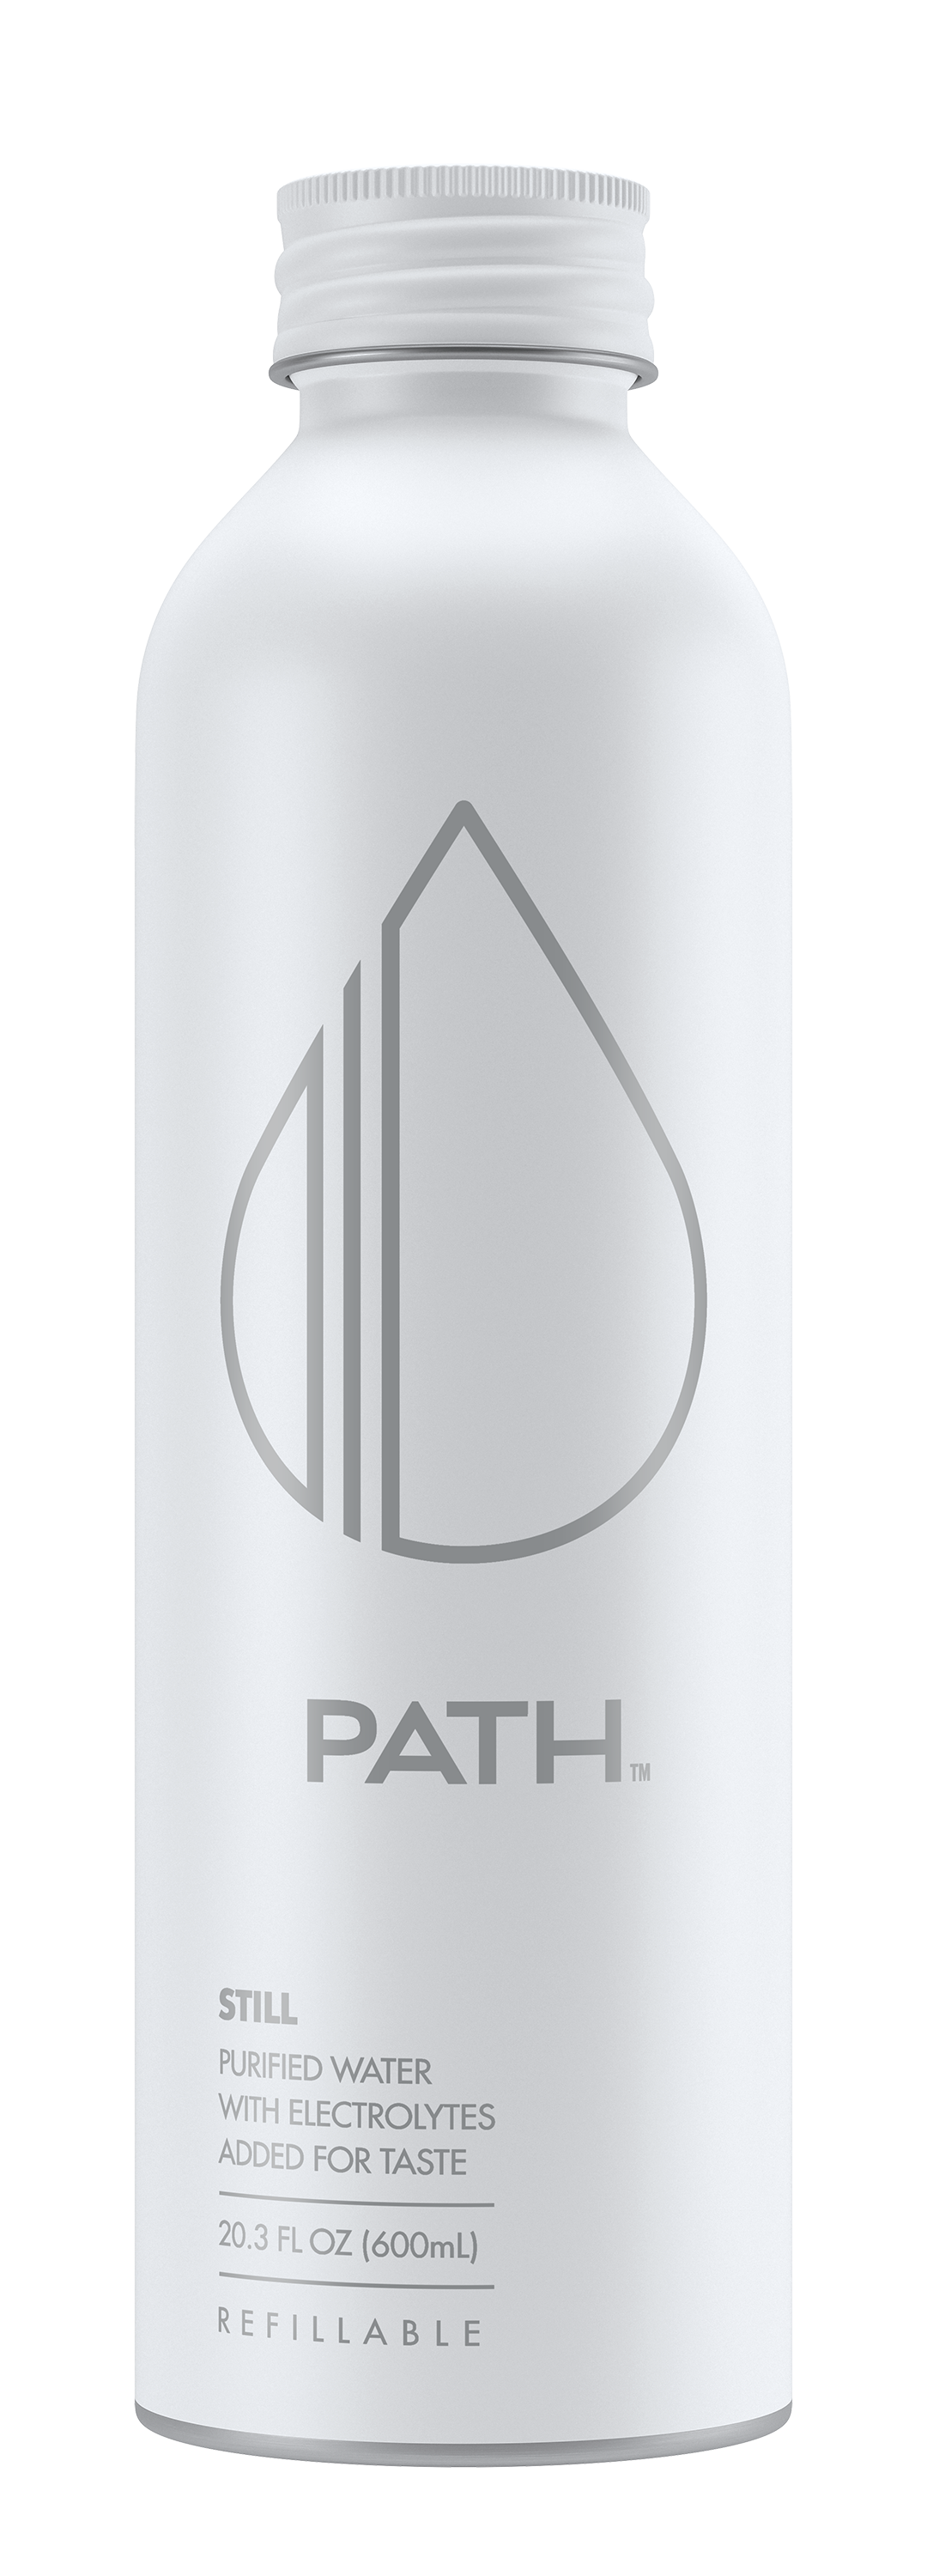 PATH Water Ultra-Filtered Water, Limited Edition Aluminum SpongeBob Themed  Bottles, 16.9 oz, 9 count 